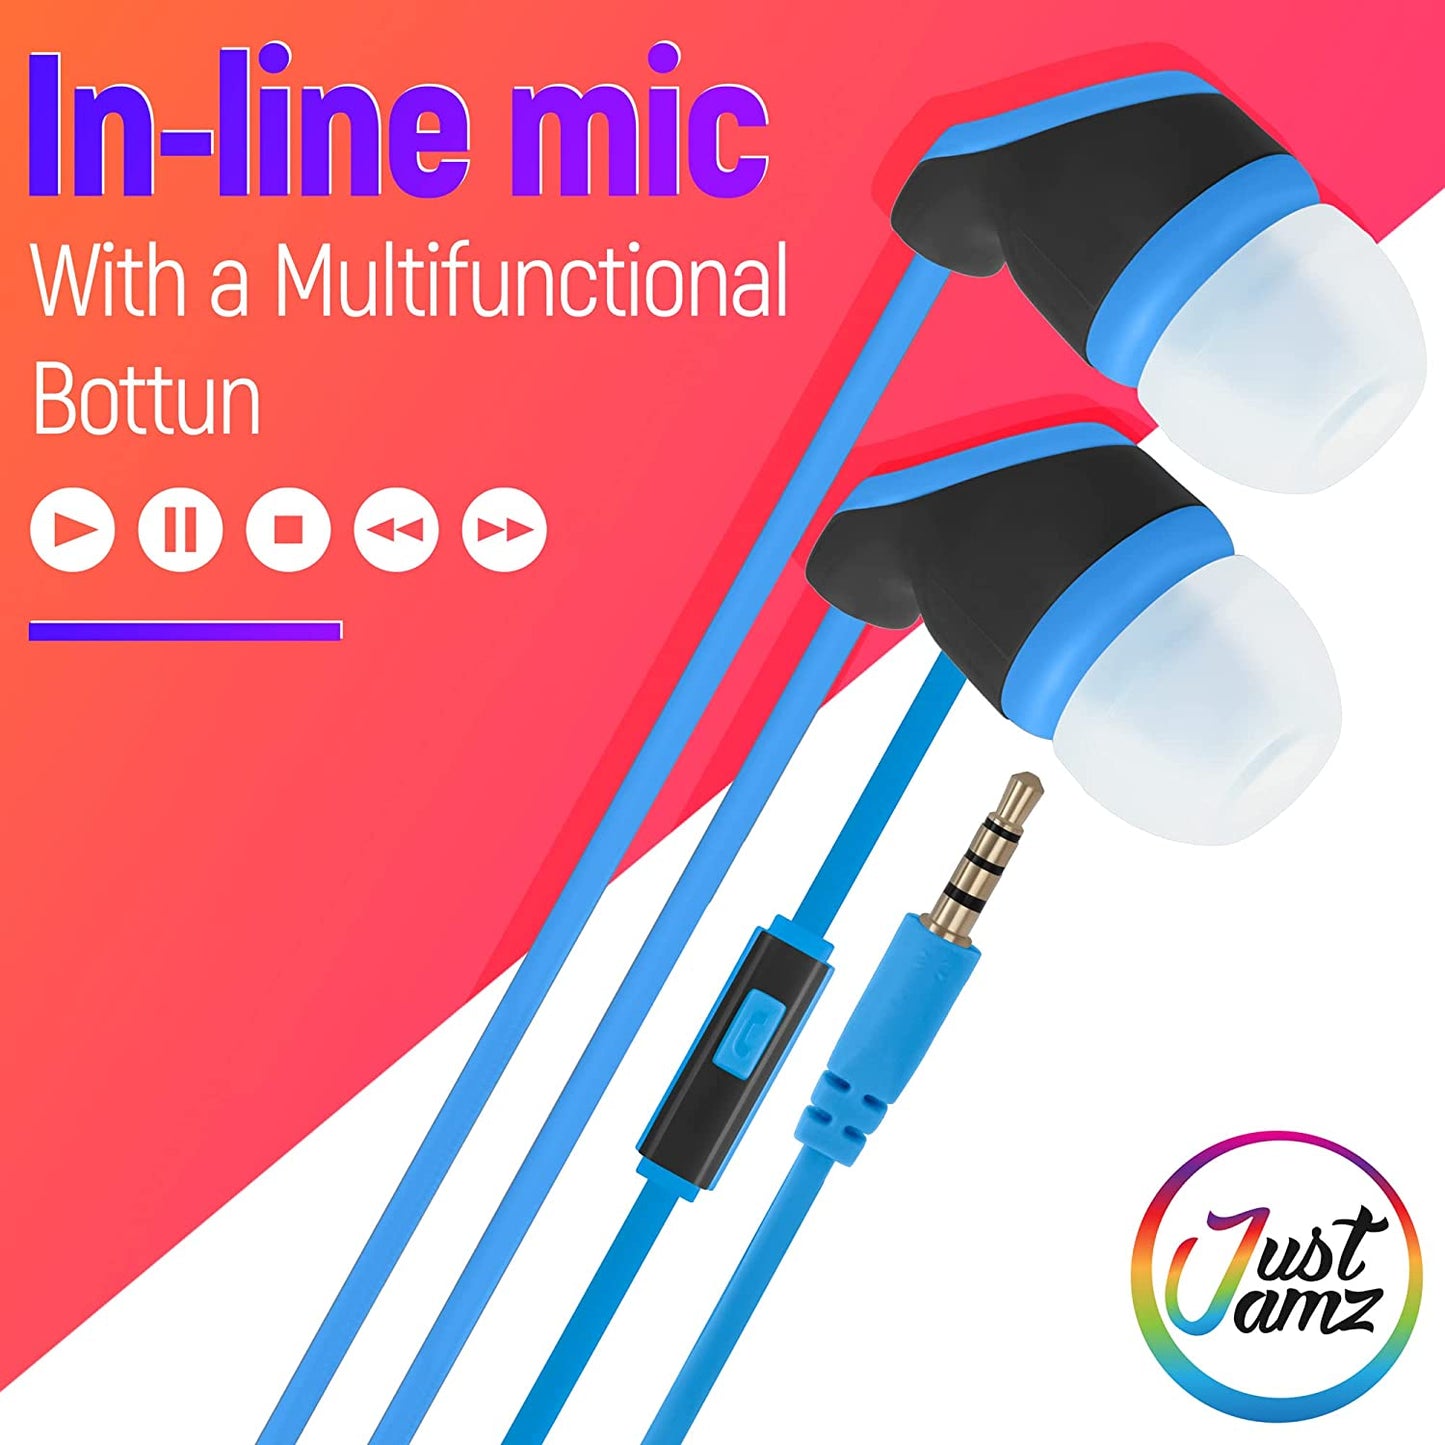 JustJamz® Kidz | 100 Pack | Earbuds with Microphone | Disposable Earphones | Call with Mic | Stereo Headphones | Bulk Earbuds for Schools, Kids, Classrooms & Libraries | Mixed Colors